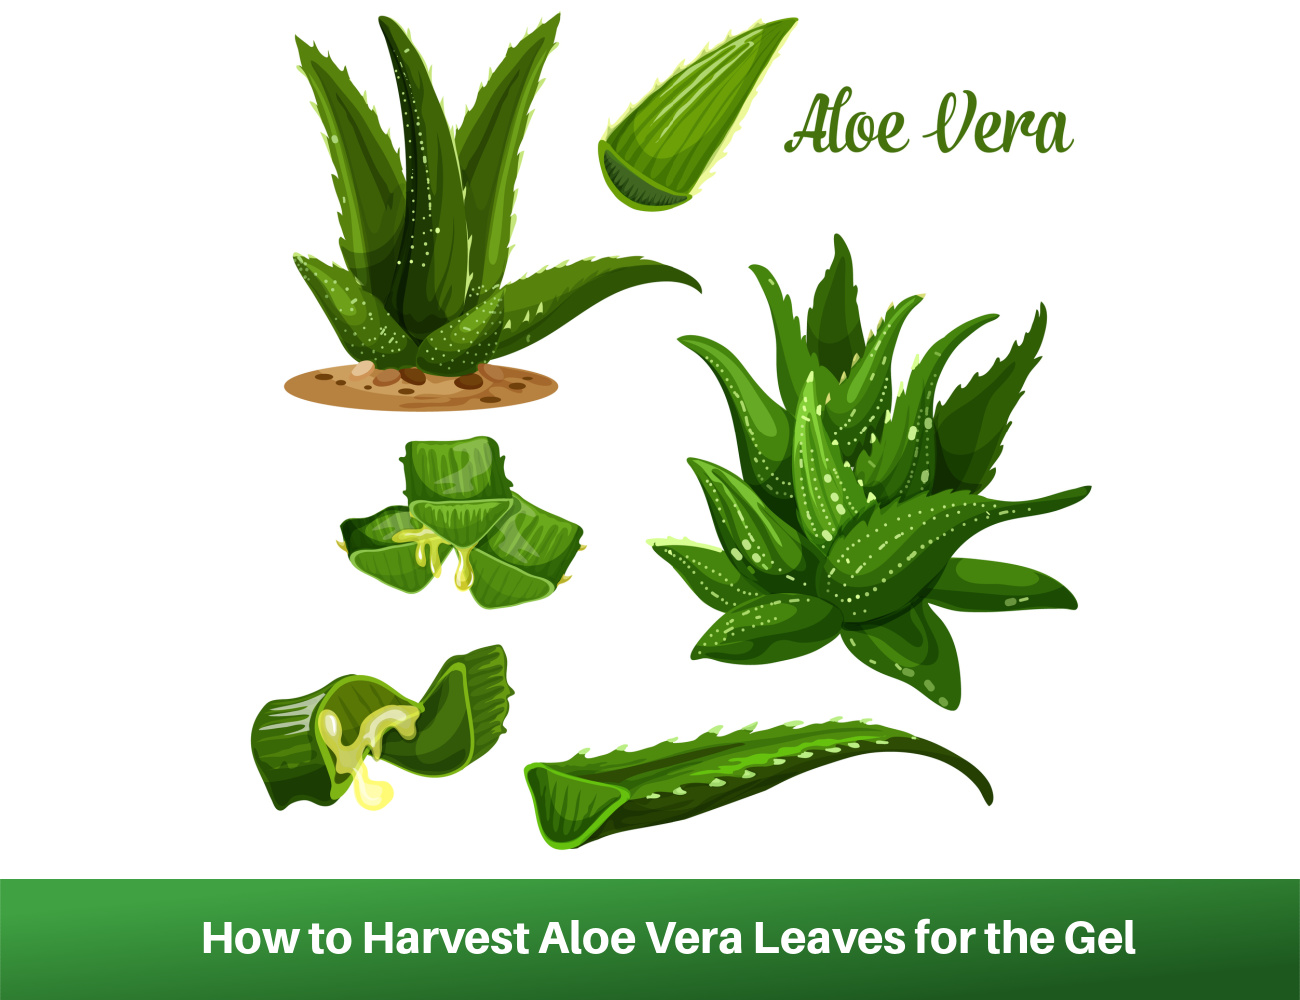 How to Harvest Aloe Vera Leaves for the Gel